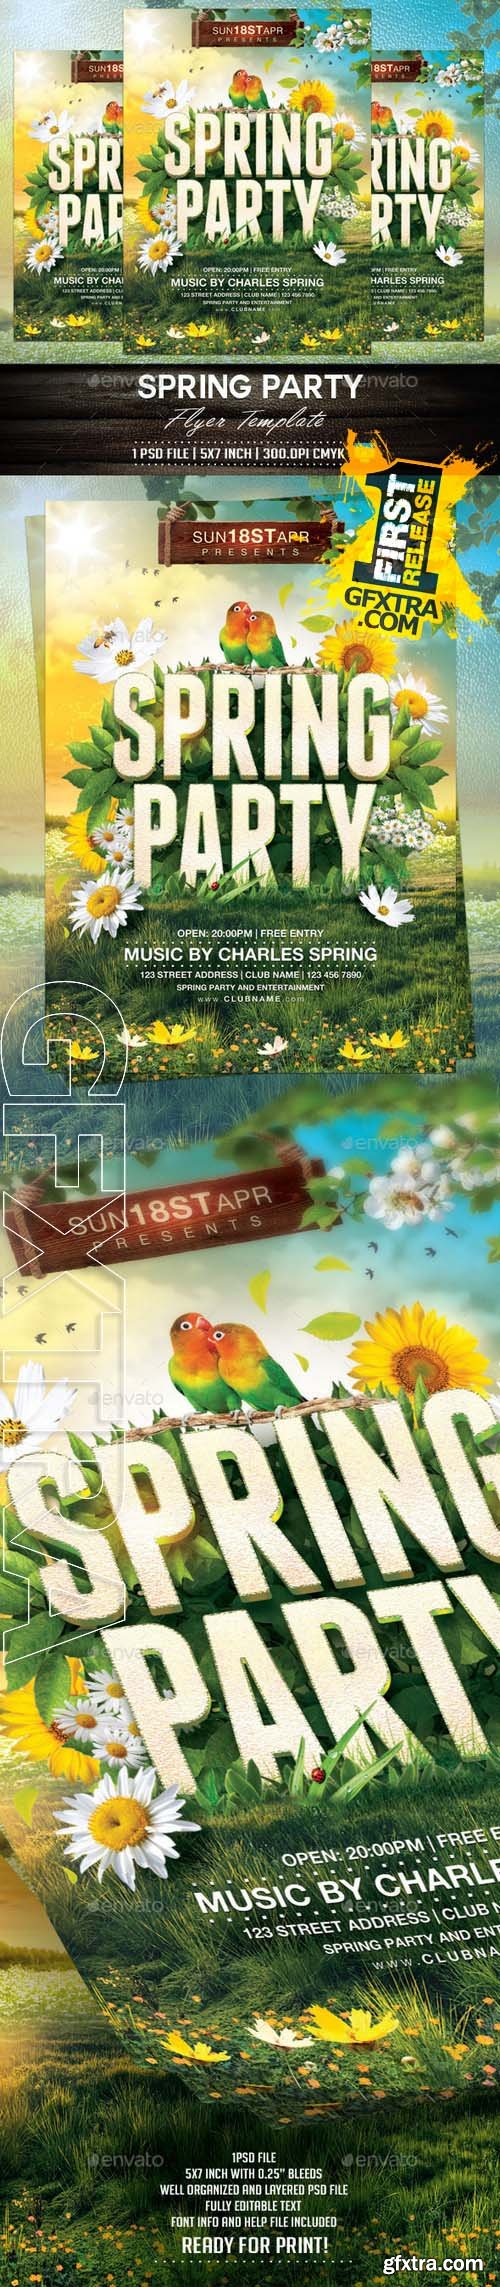 Spring Party Flyer Template - Graphicriver 10489214